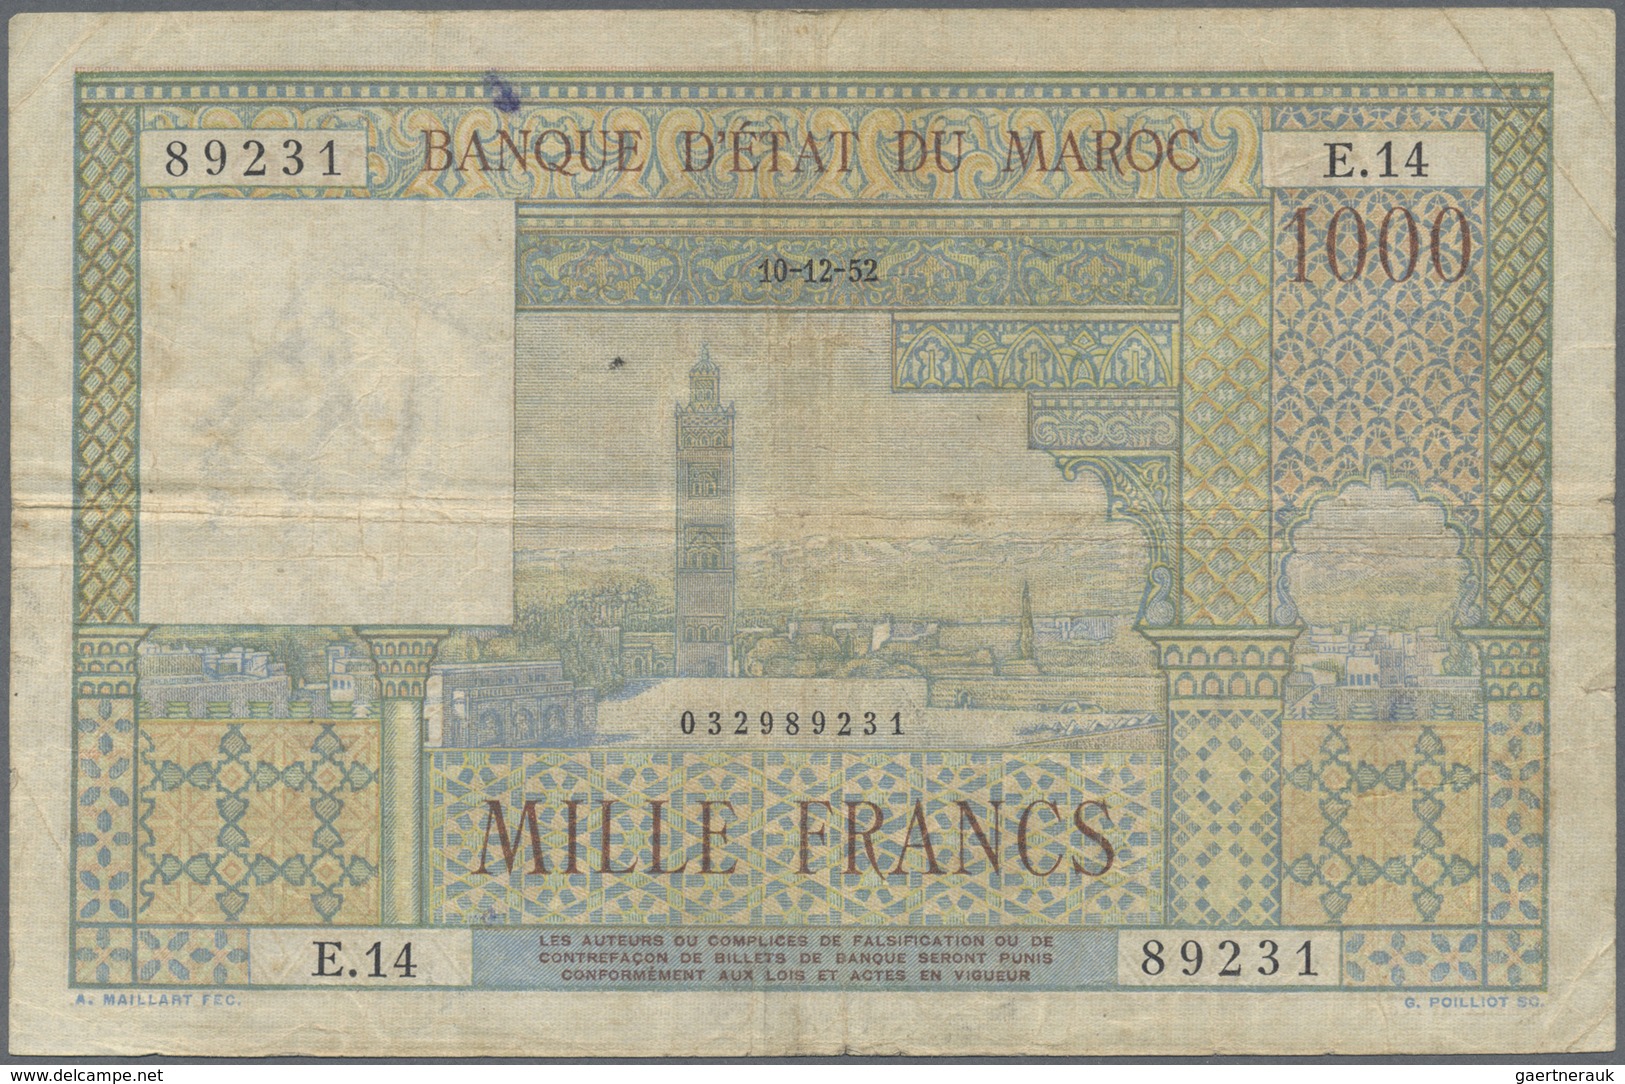 Morocco / Marokko: set of 10 notes 1000 Francs 1952/1956 P. 47, all in used condition with folds, cr